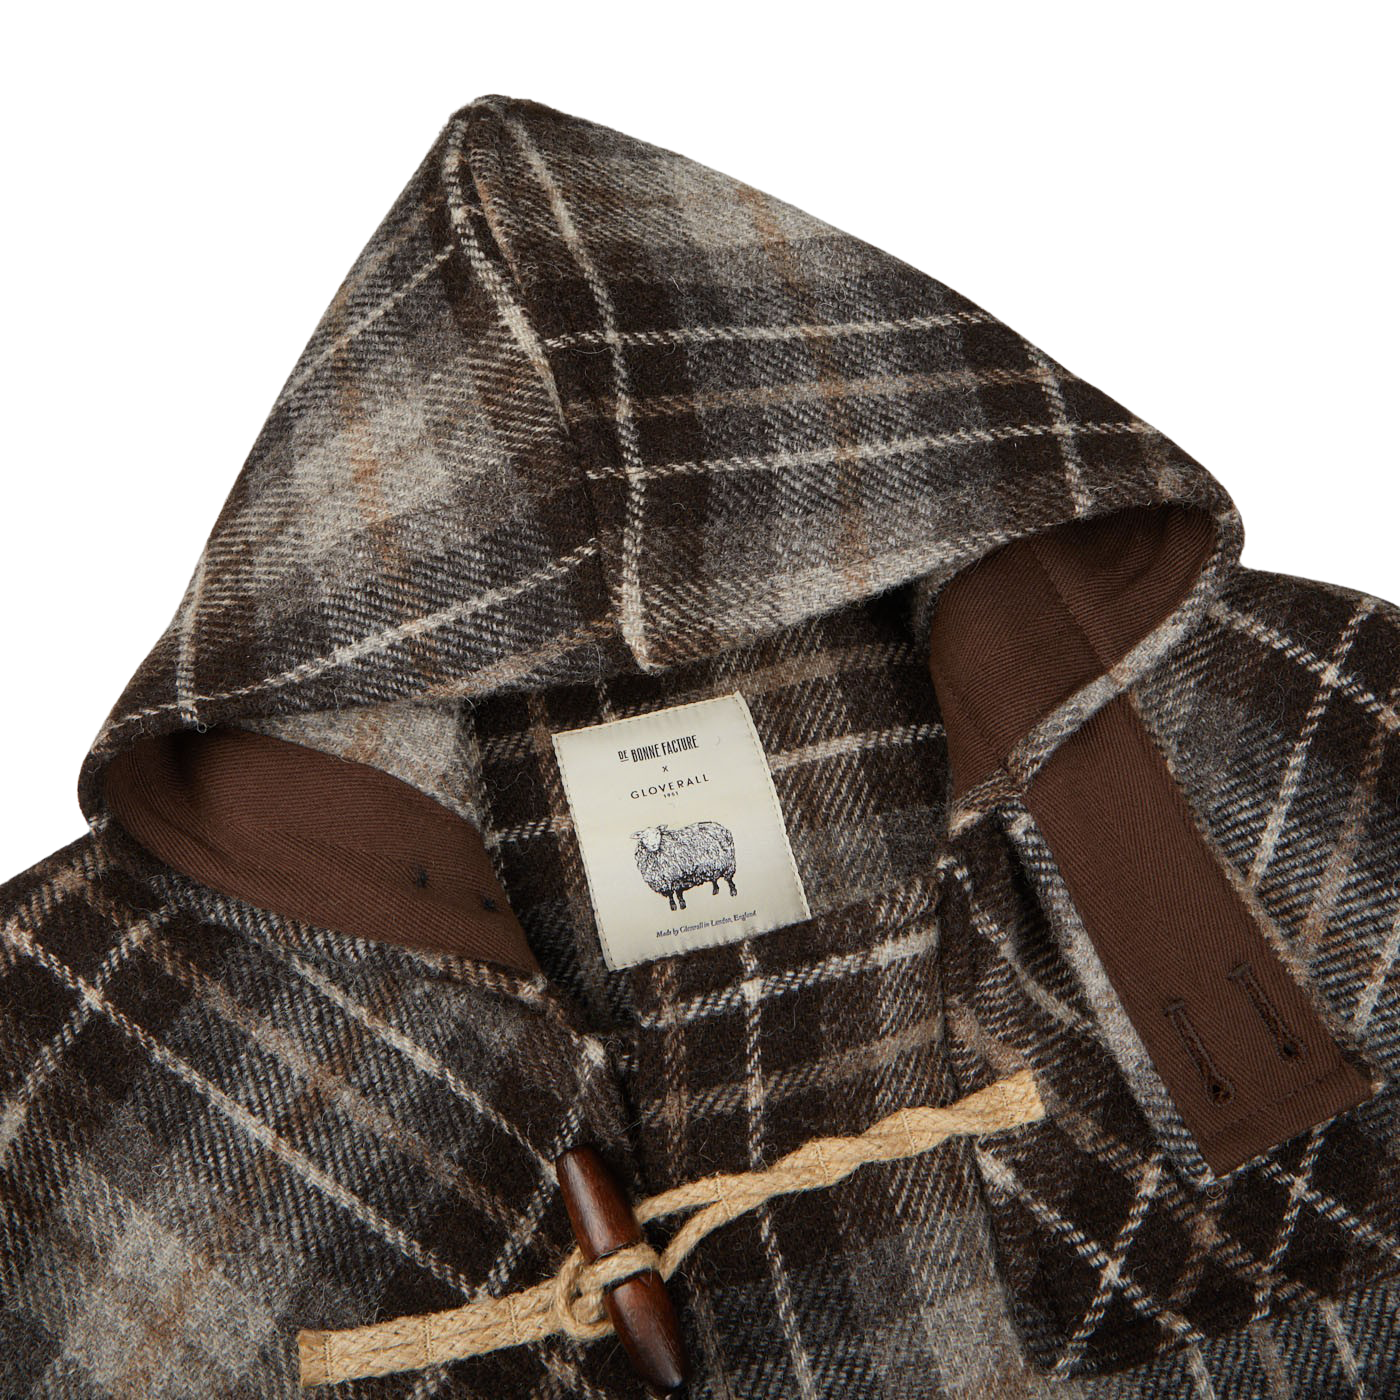 A brown undyed Shepherds Check wool Monty Duffle coat with a hood from De Bonne Facture.